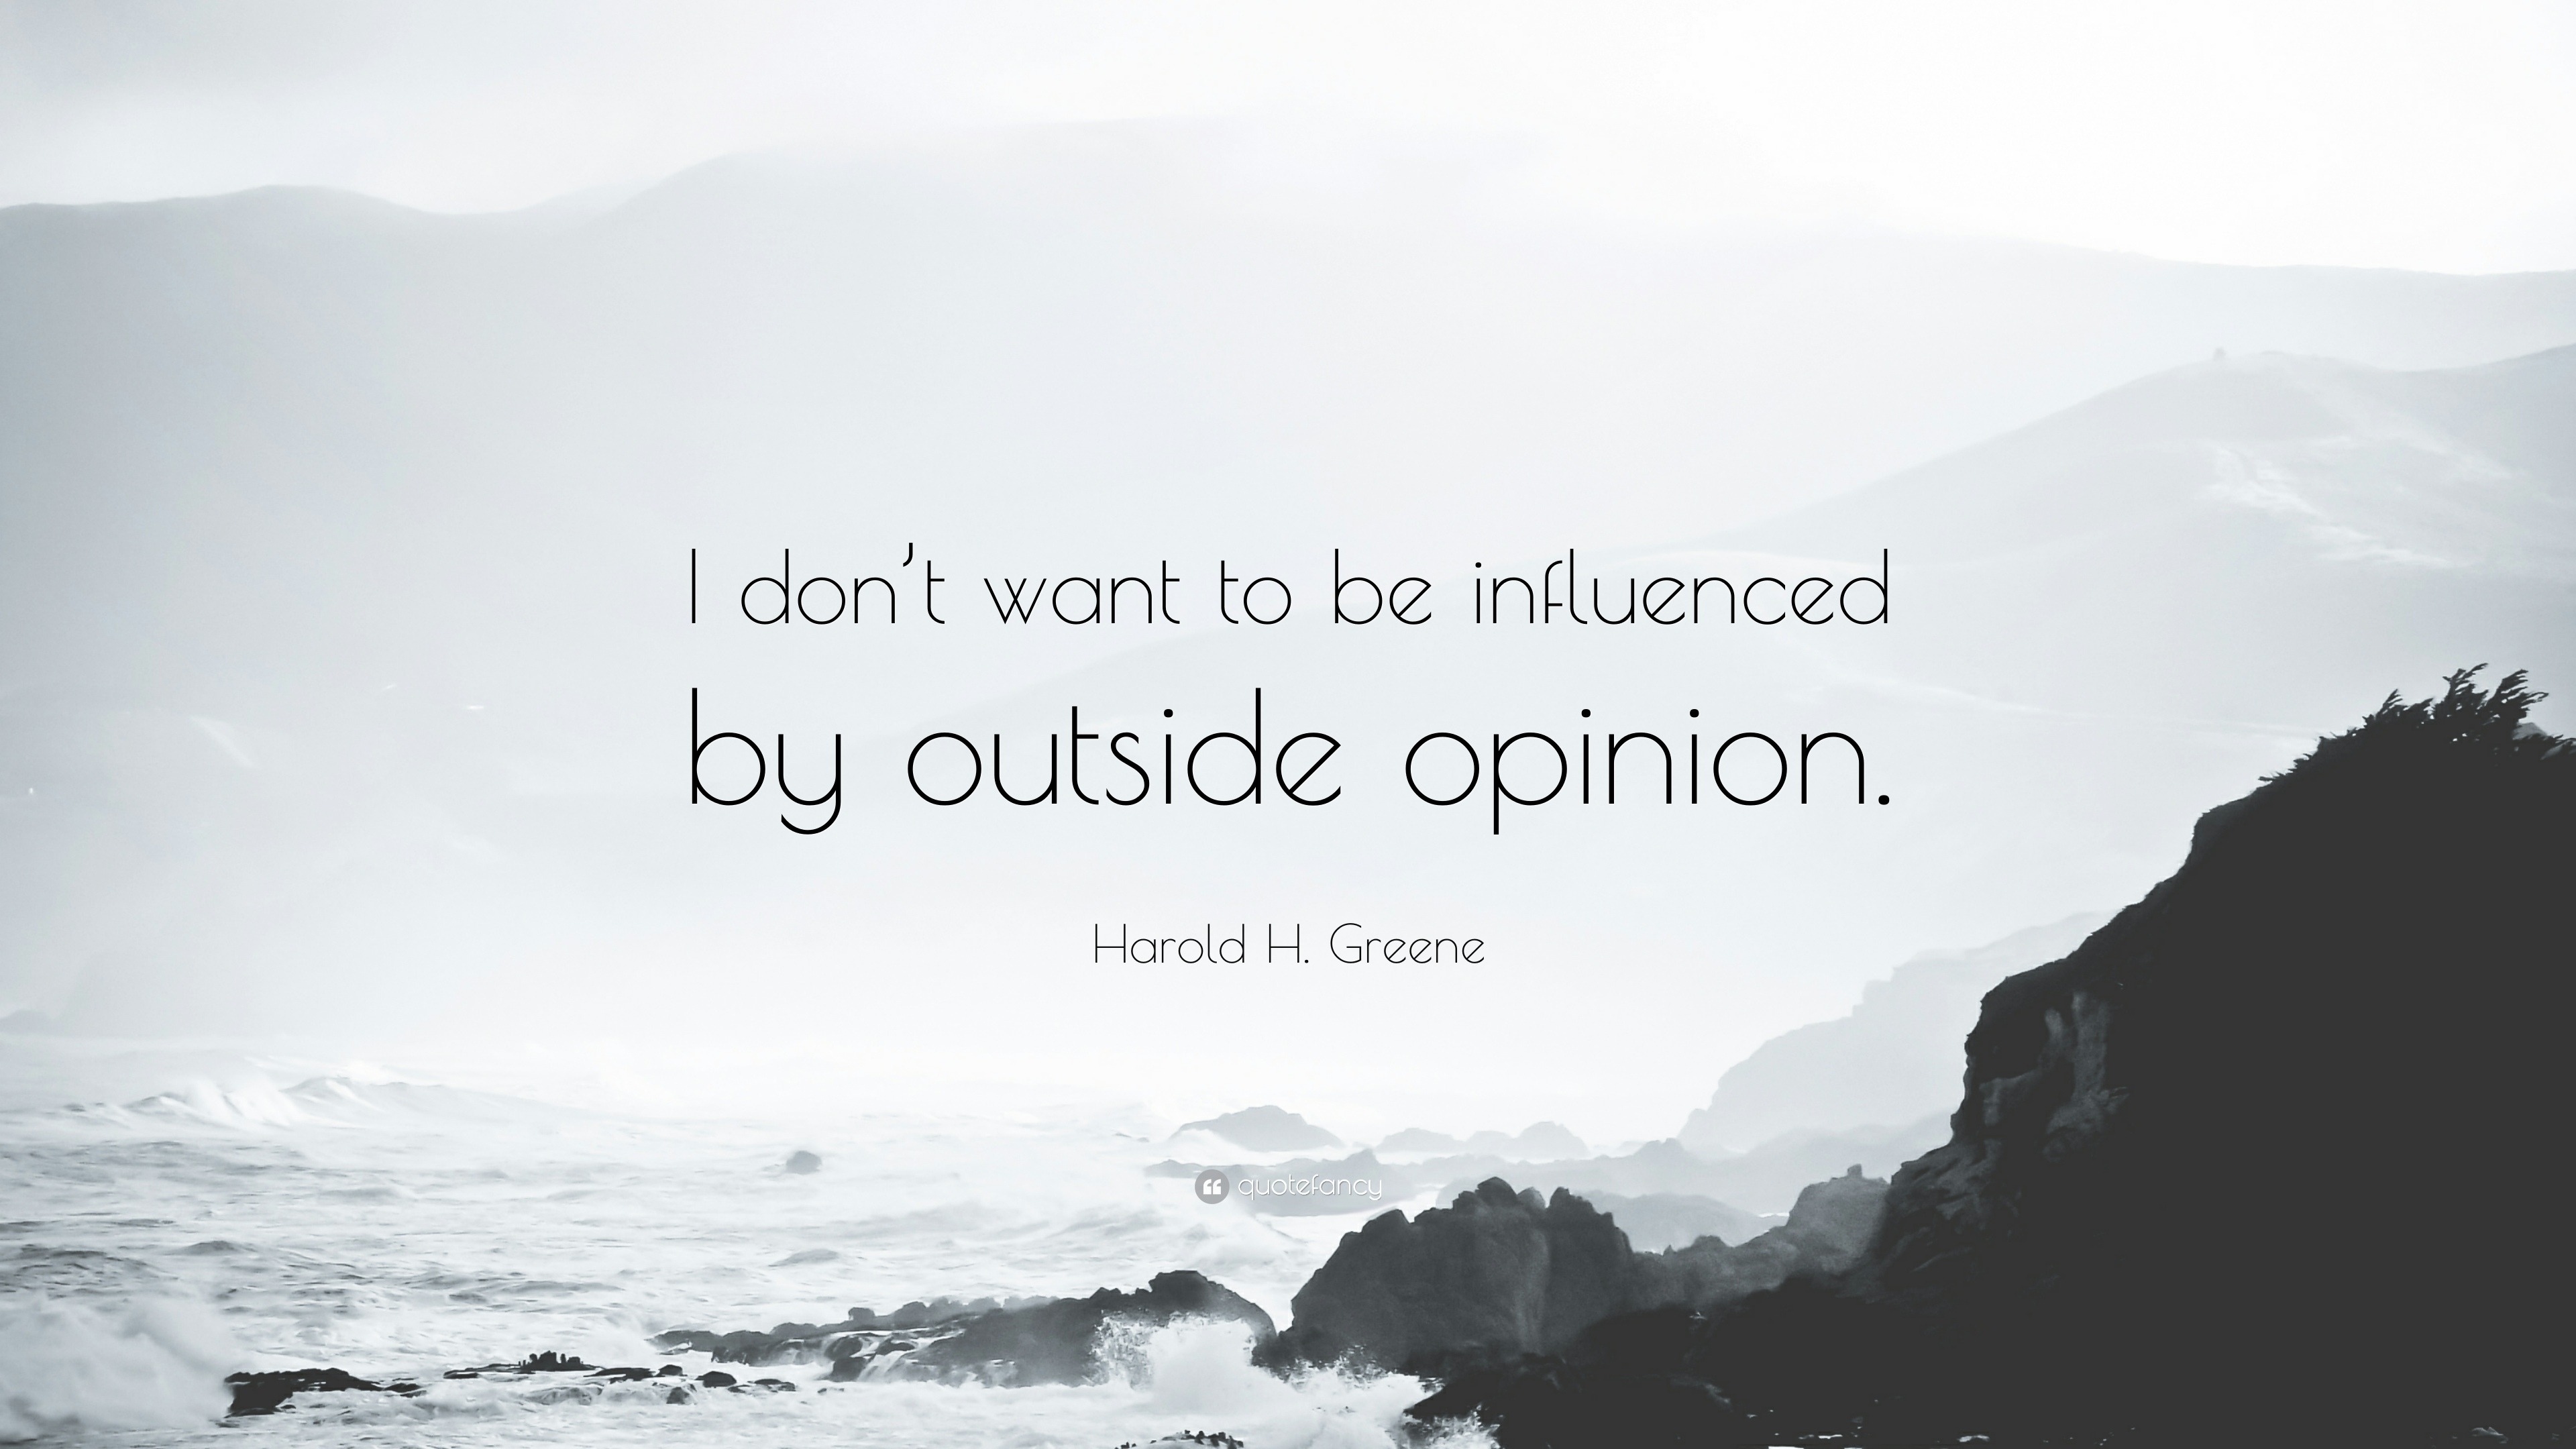 Harold H. Greene Quote: “I Don't Want To Be Influenced By Outside Opinion.”